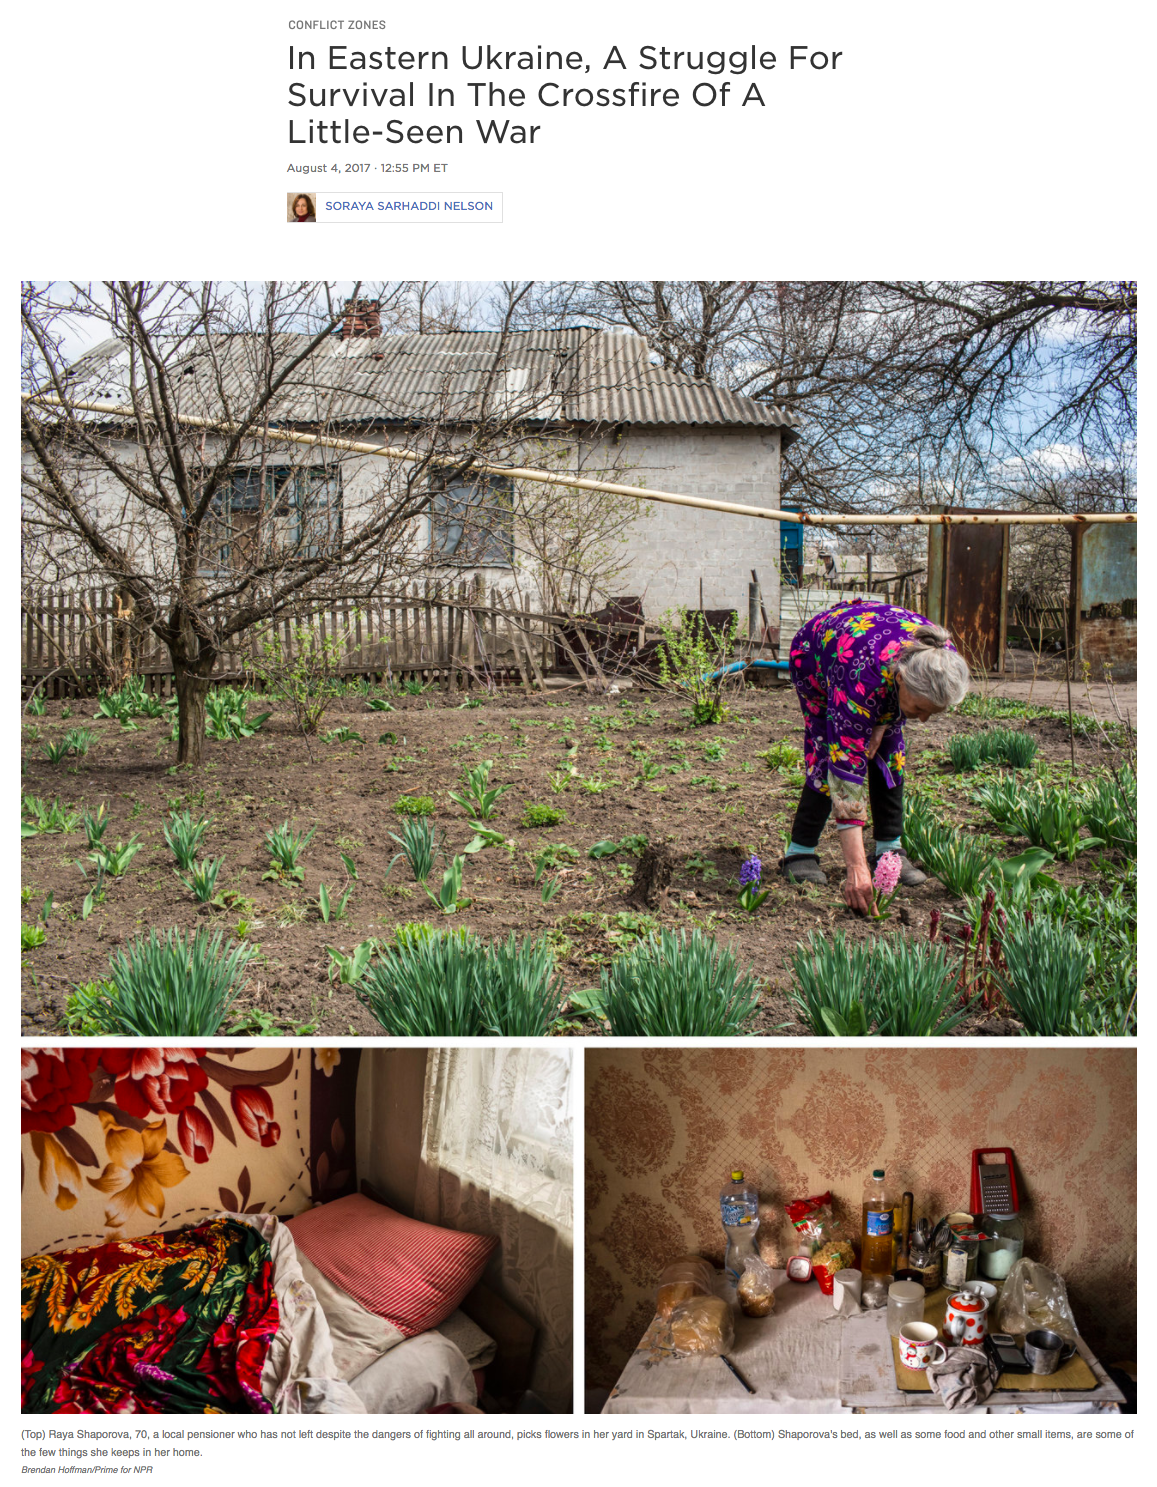  Photography + Writing:  Brendan Hoffman  for NPR  Photo Editing: Ariel Zambelich  Story:&nbsp; In Eastern Ukraine, A Struggle For Survival In The Crossfire Of A Little-Seen War  